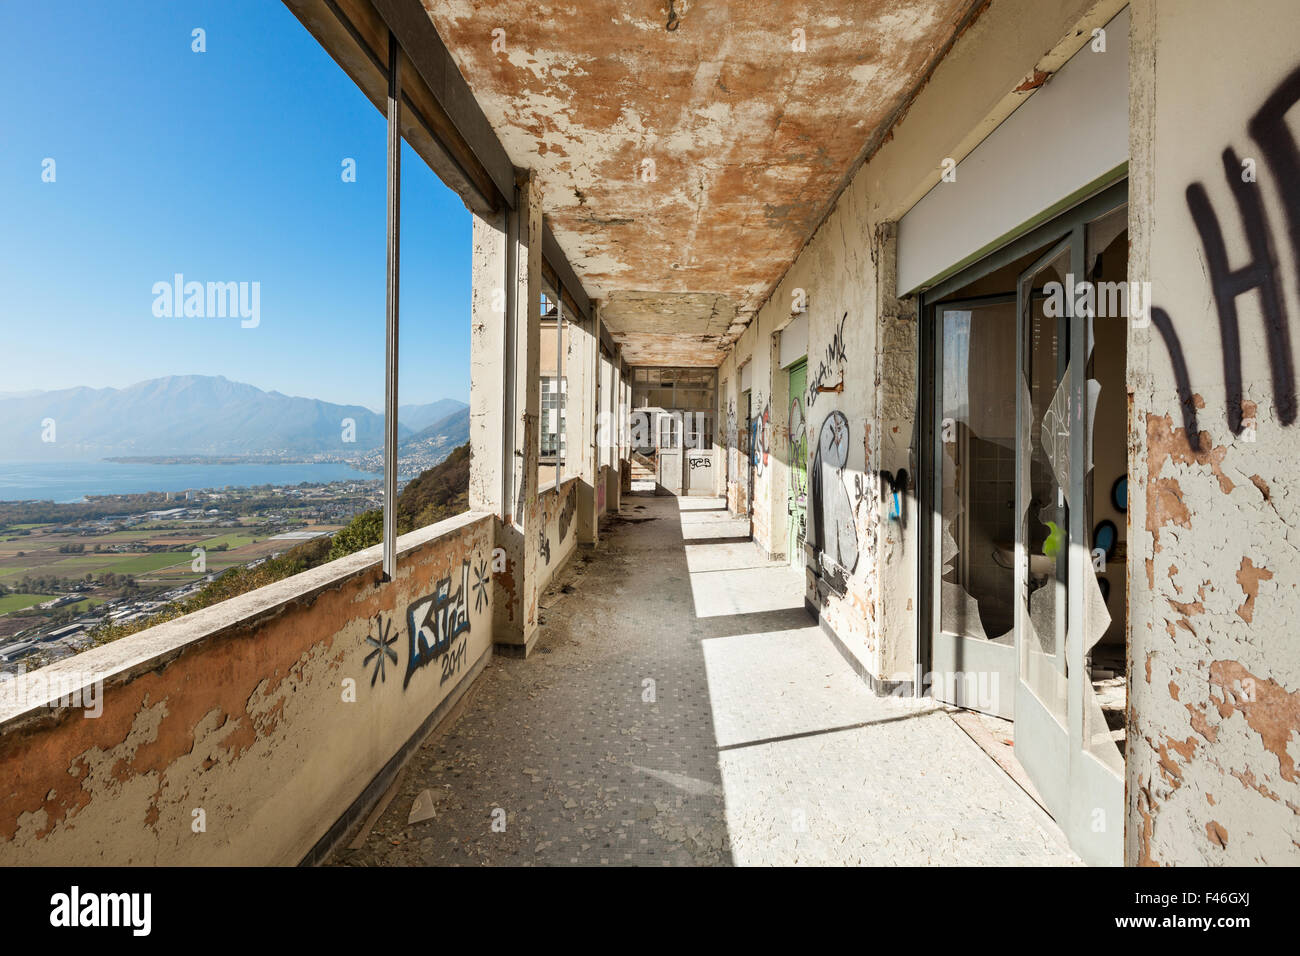 old destroyed building, corridor with windows Stock Photo